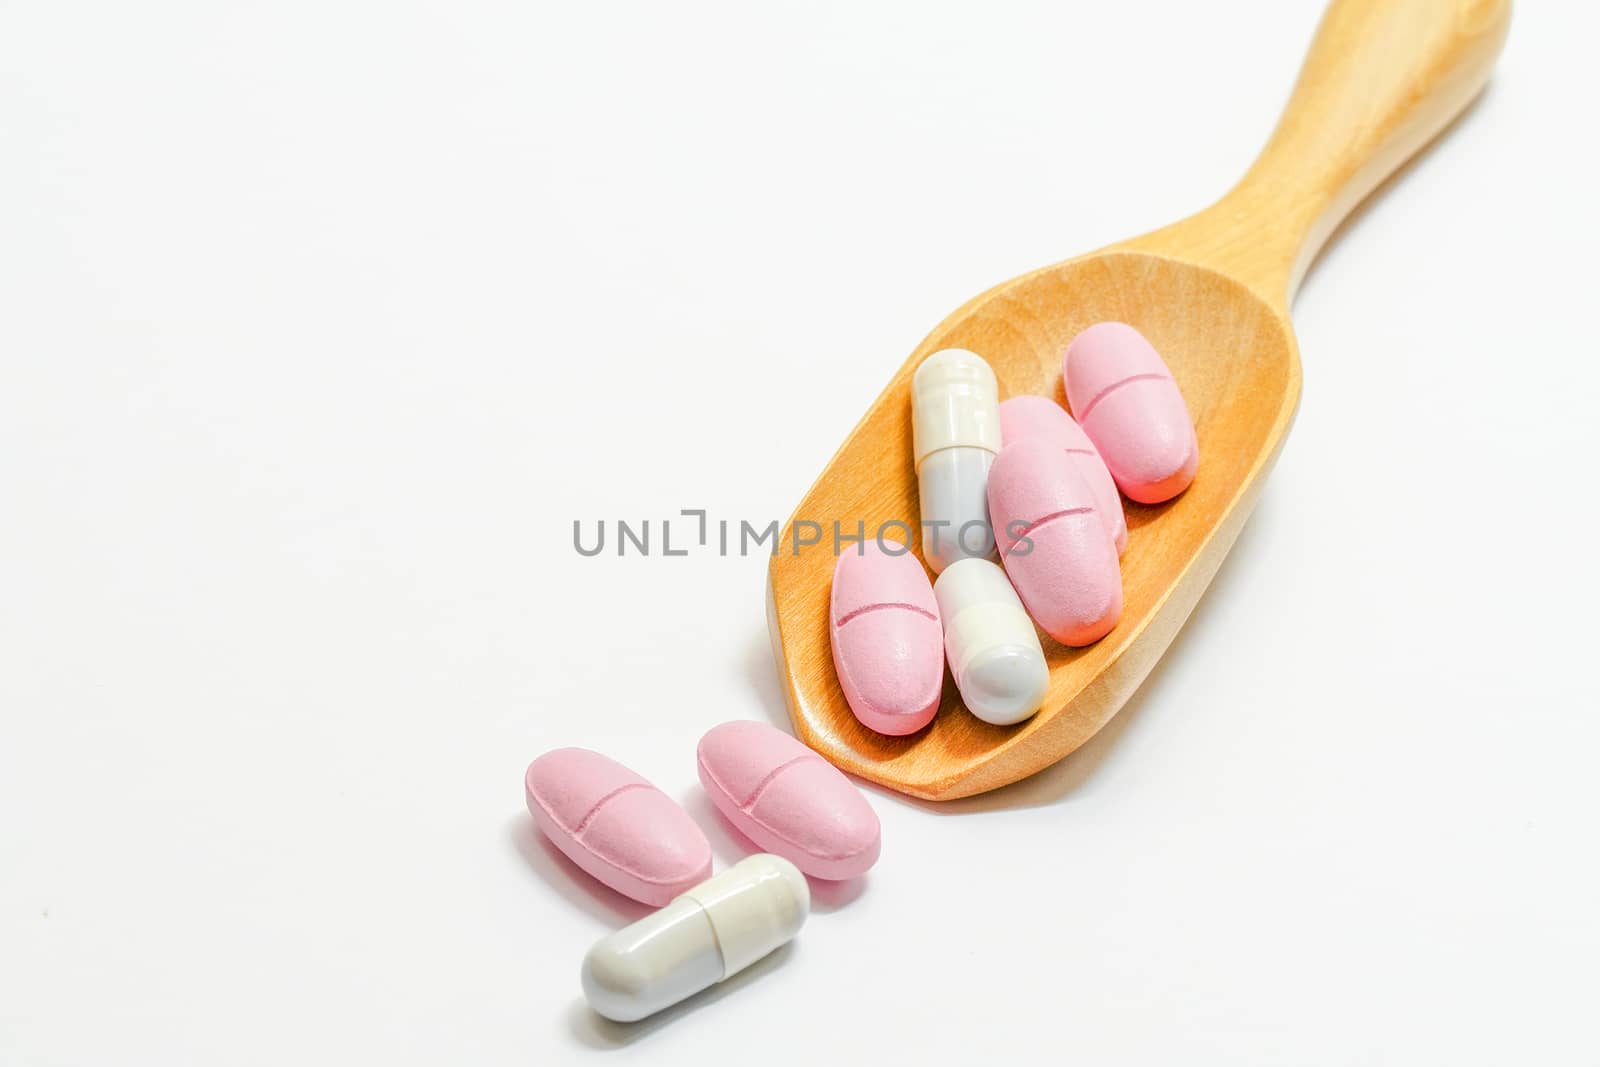 Medicine on a wooden spoon and on a white background by TakerWalker